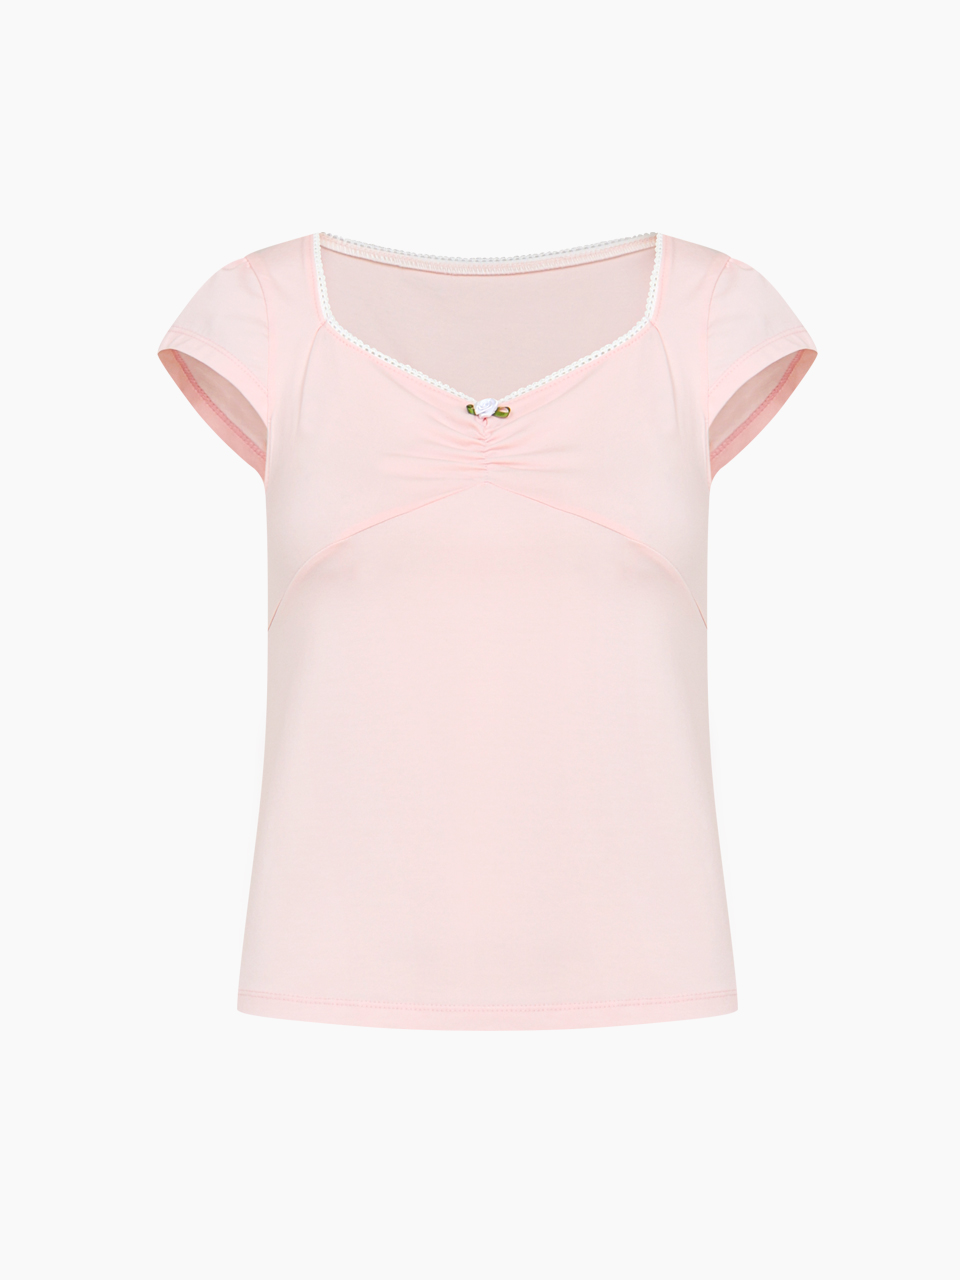 rosy shirring top - baby pink